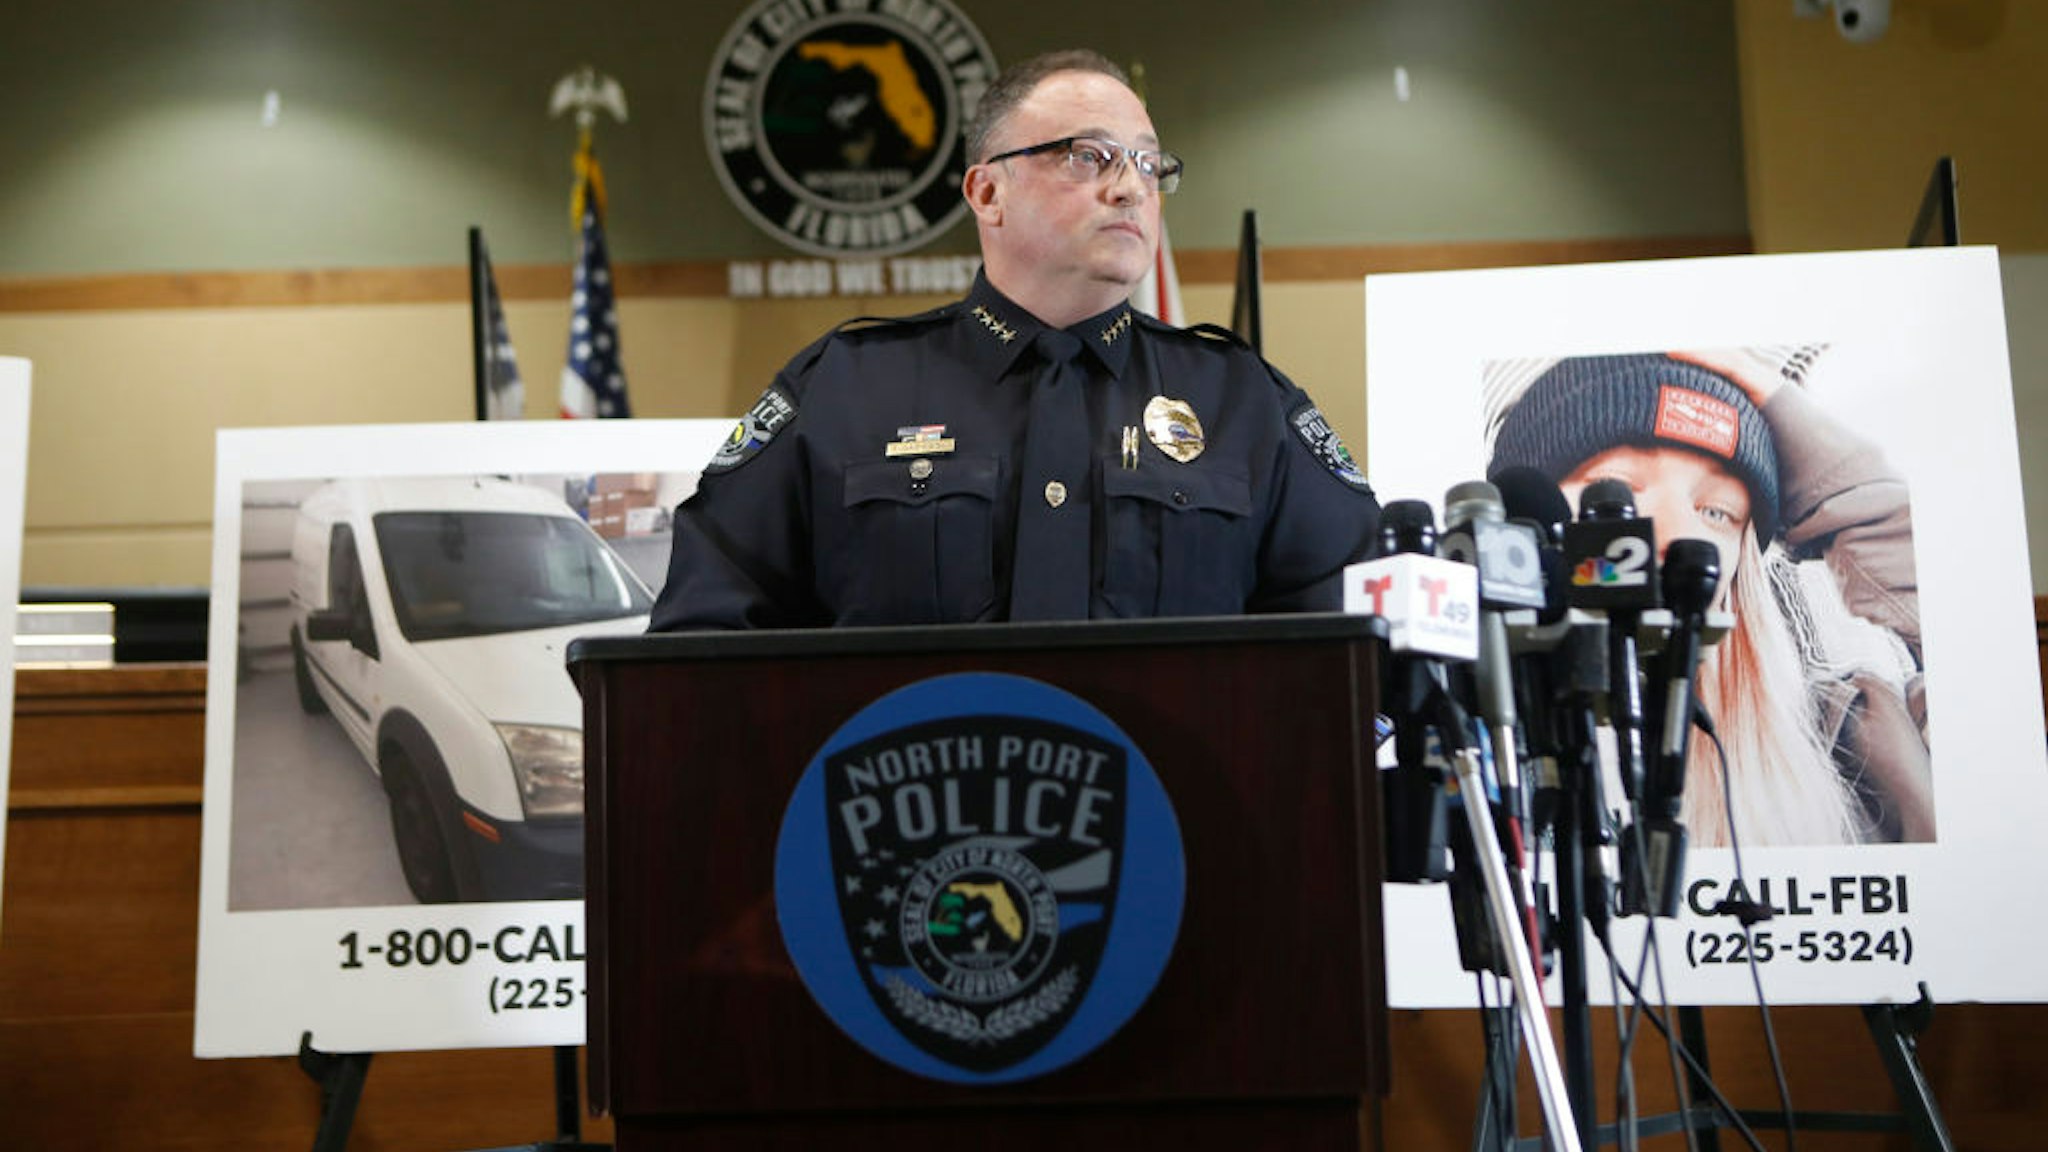 The City of North Port Chief of Police Todd Garrison speaks during a news conference for missing person Gabby Petito on September 16, 2021 in North Port, Florida. Gabby Petito went missing while on a cross country trip with her boyfriend Brian Laundrie and has not been seen or heard from since late August. Police said no criminality is suspected at this time but her fiance, Brian Laundrie, has refused to speak with law enforcement. Laundrie has be identified as a person of interest but investigators are solely focused on finding Petito. (Photo by Octavio Jones/Getty Images)